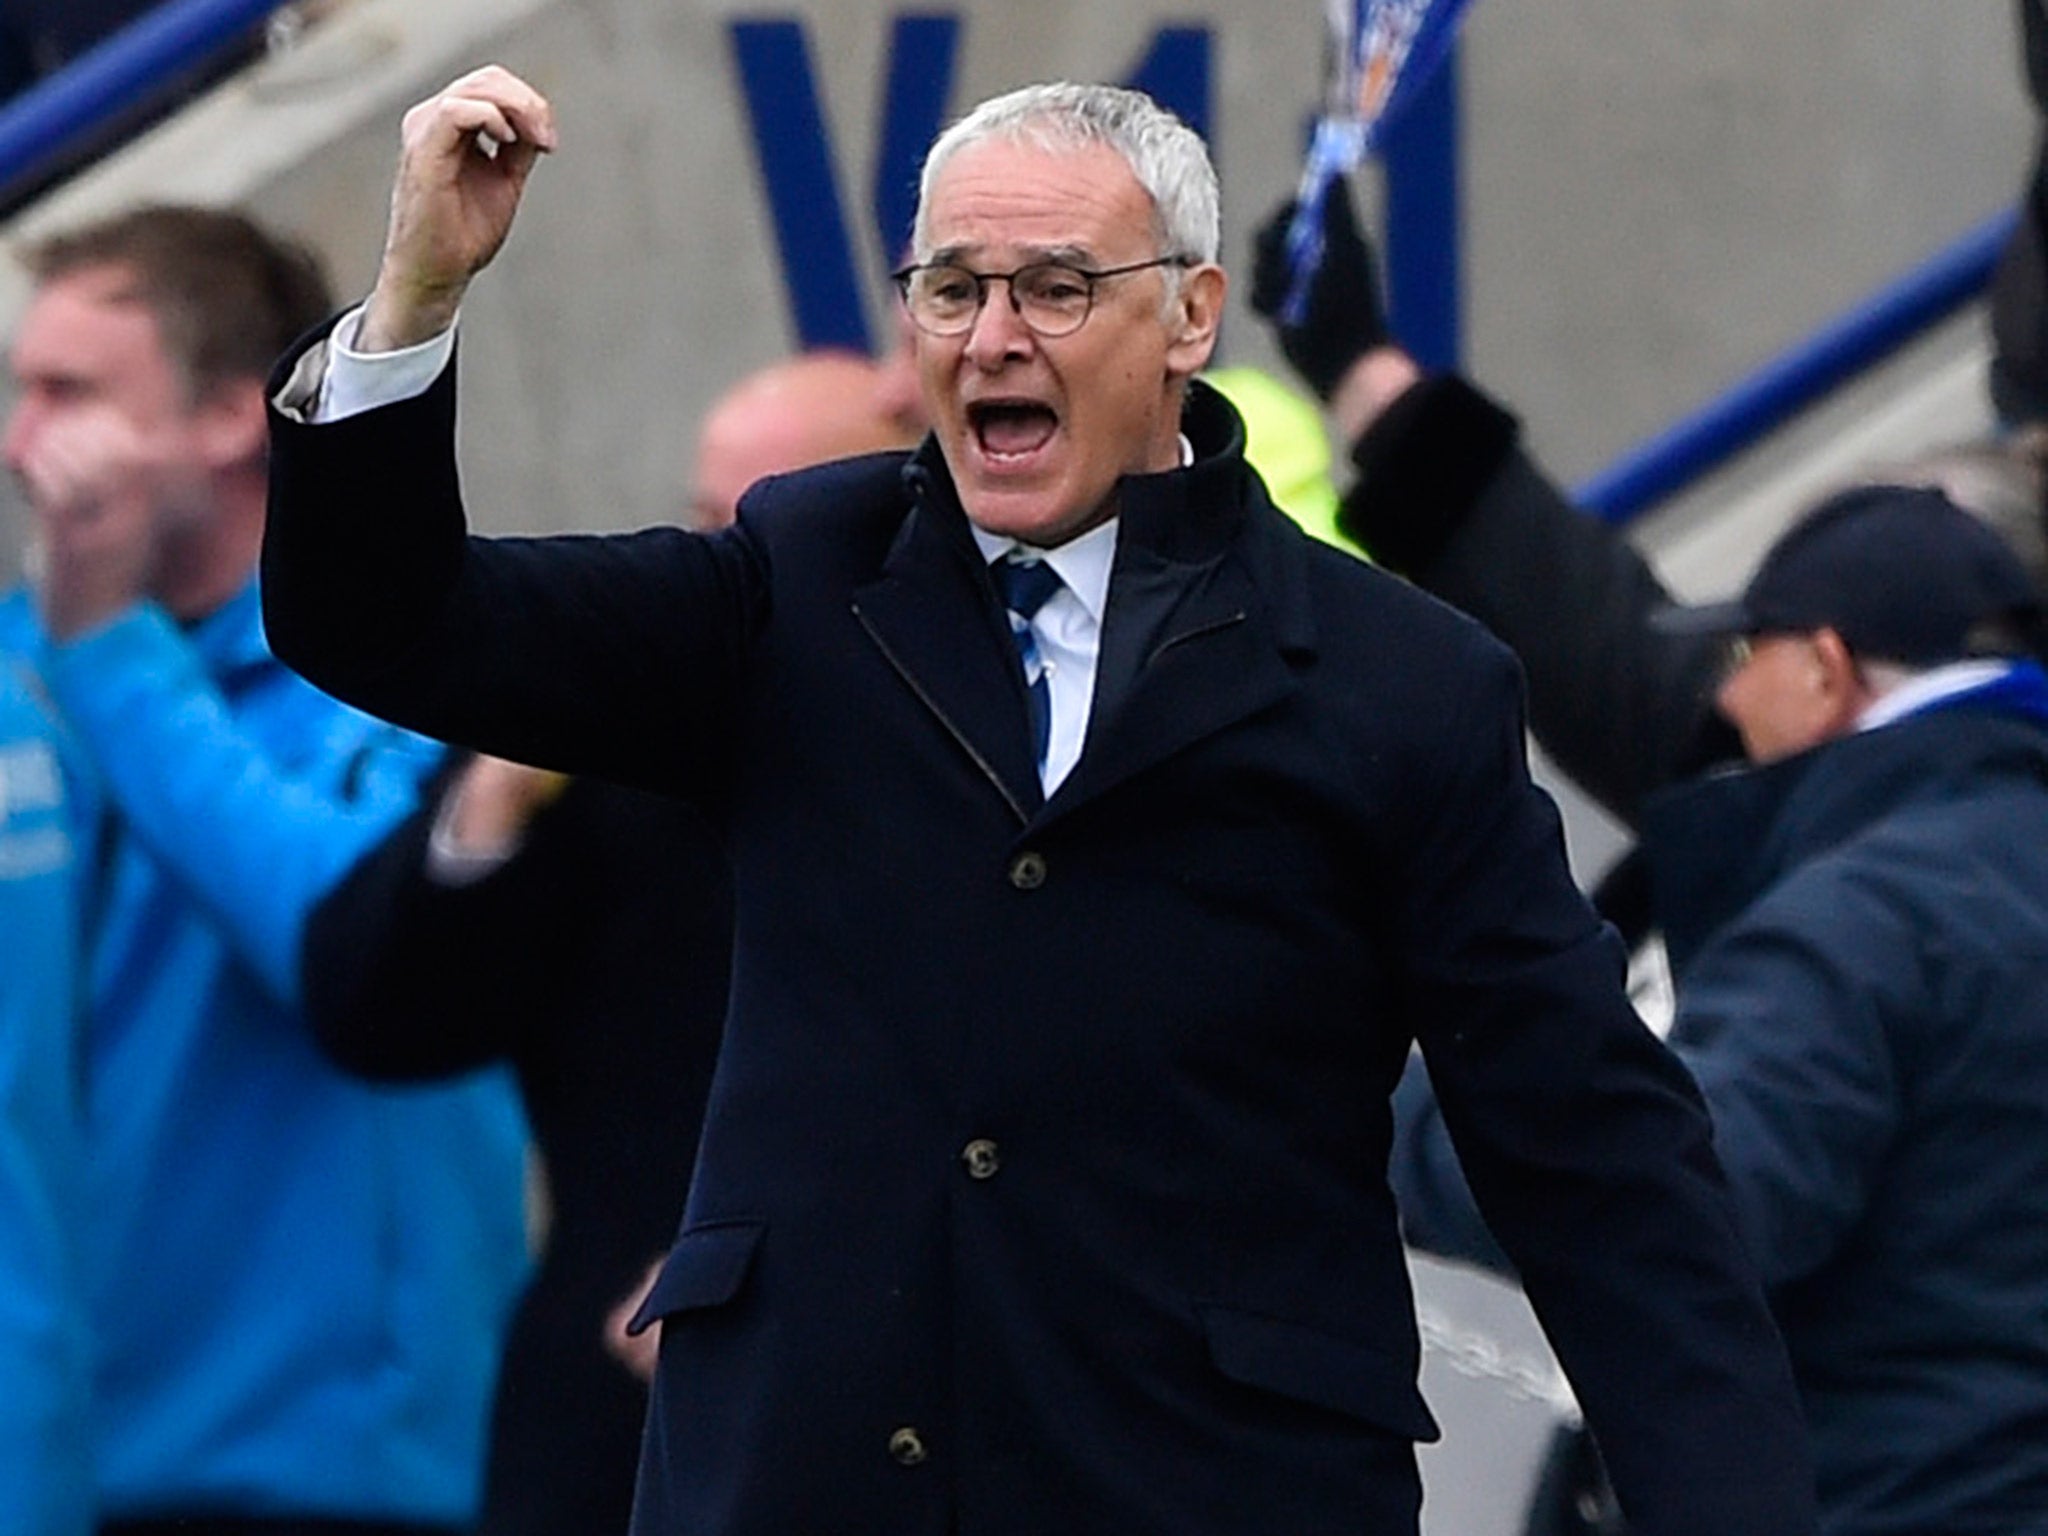 Claudio Ranieri has told is players it it 'now or never' to win the title